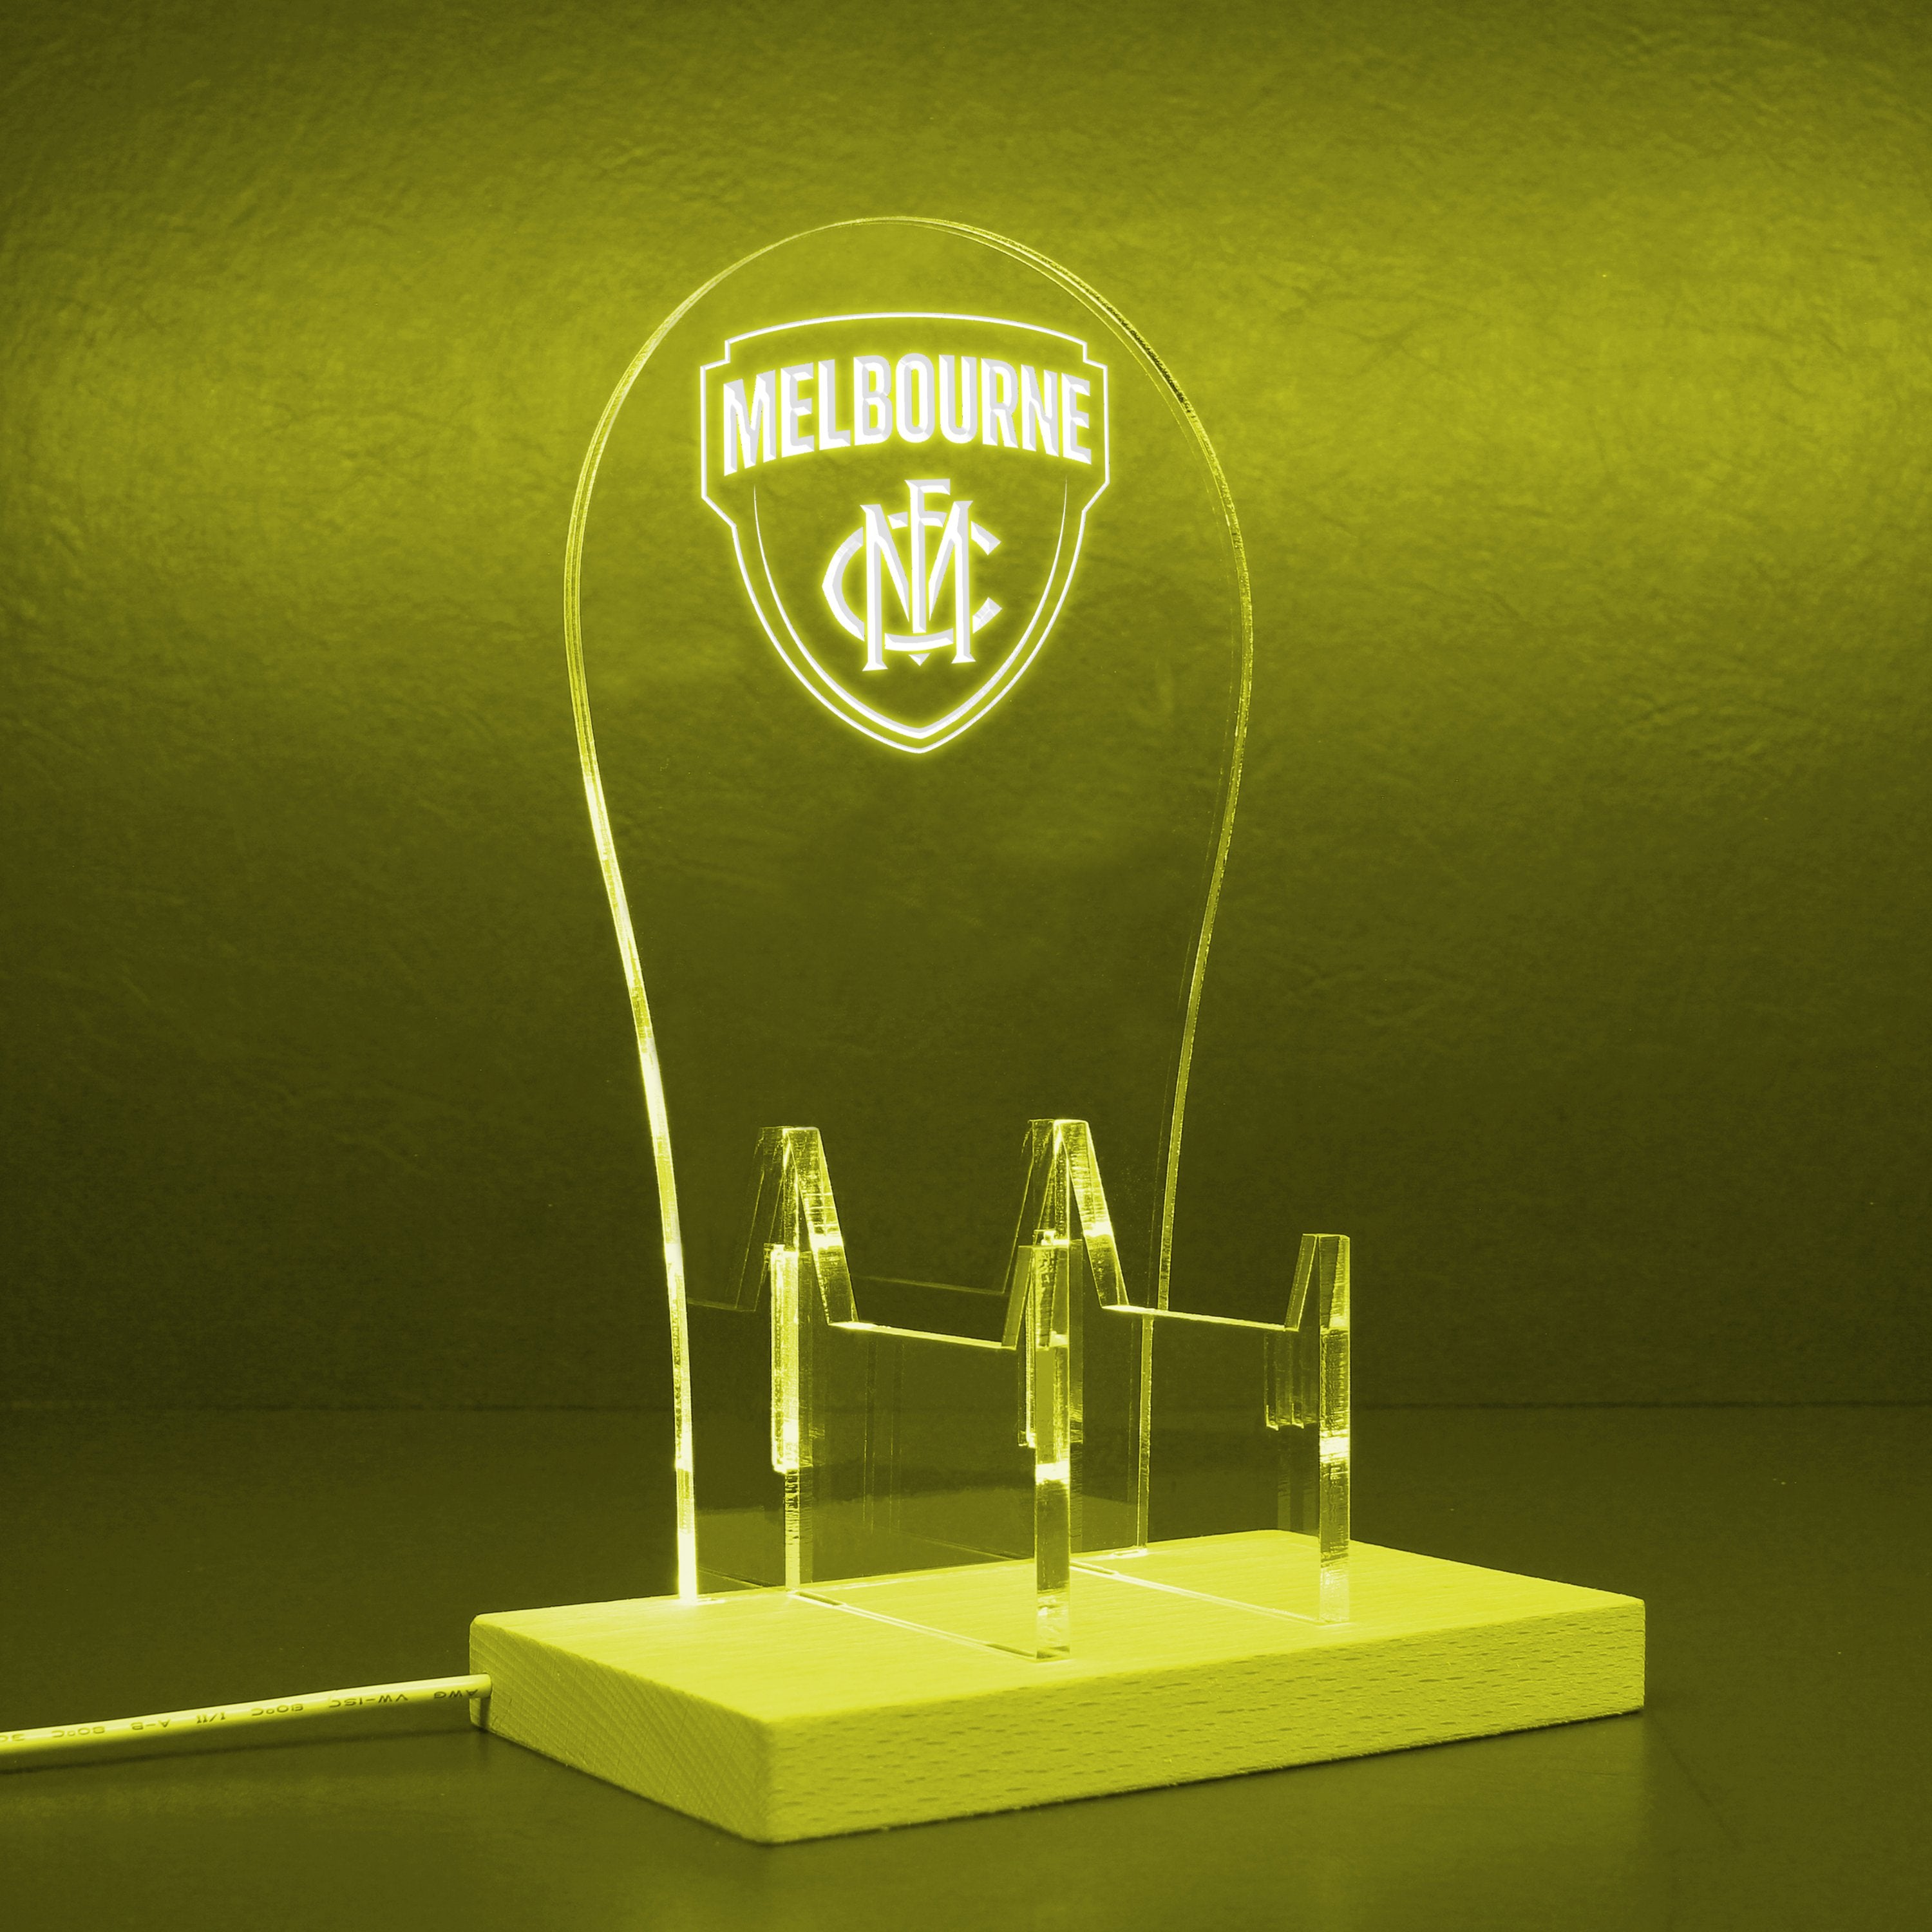 Afl Melbourne RGB LED Gaming Headset Controller Stand